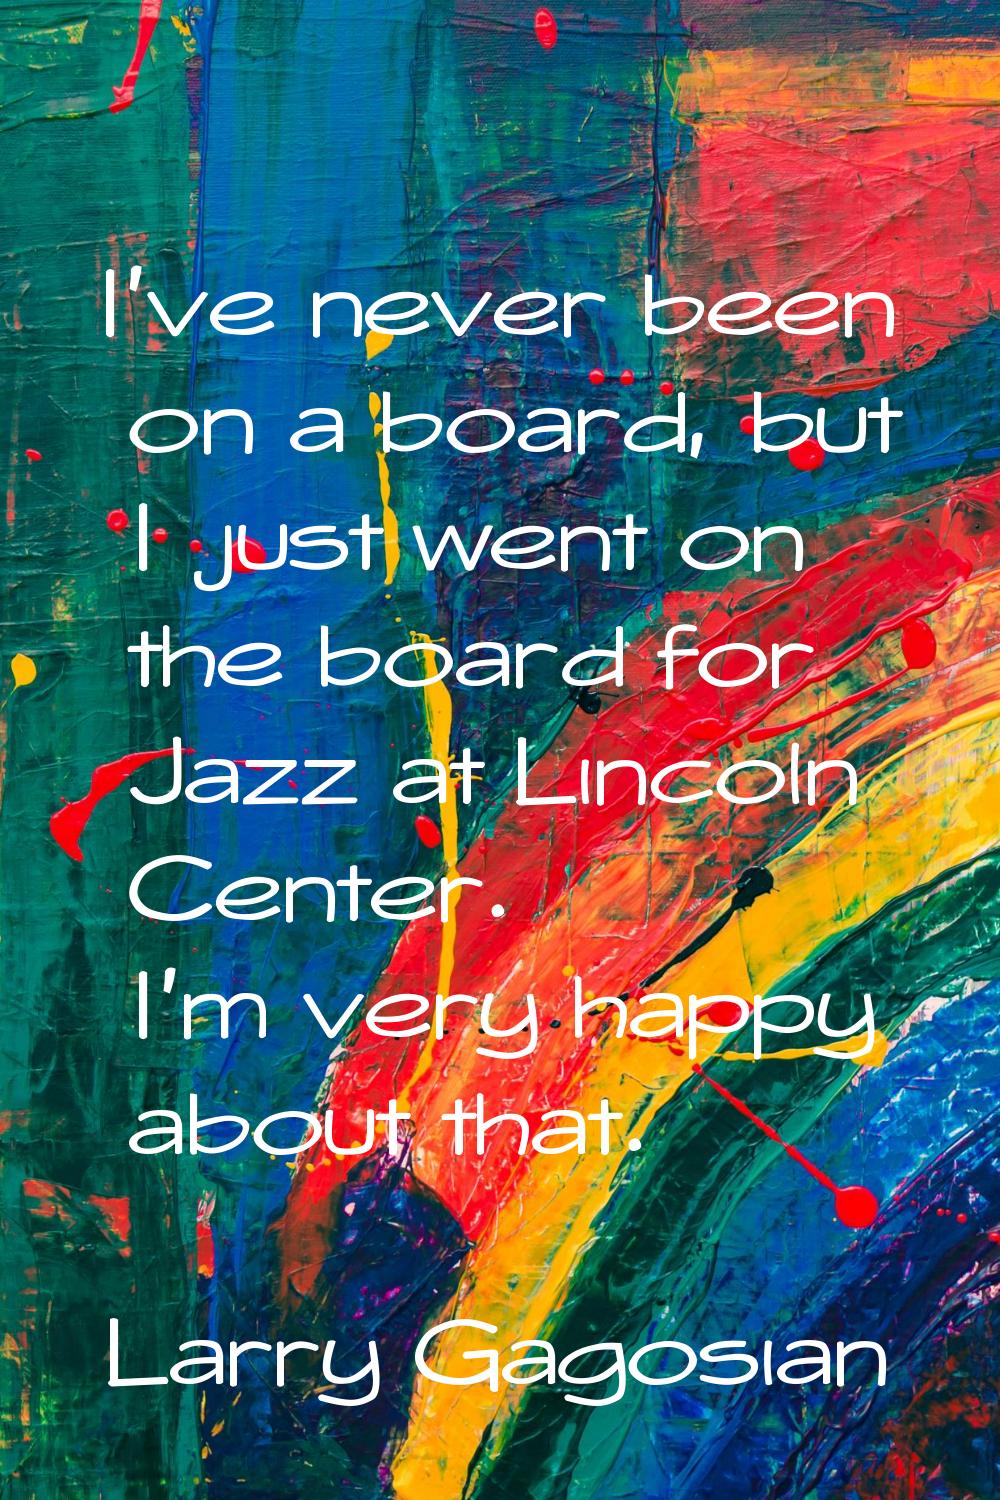 I've never been on a board, but I just went on the board for Jazz at Lincoln Center. I'm very happy